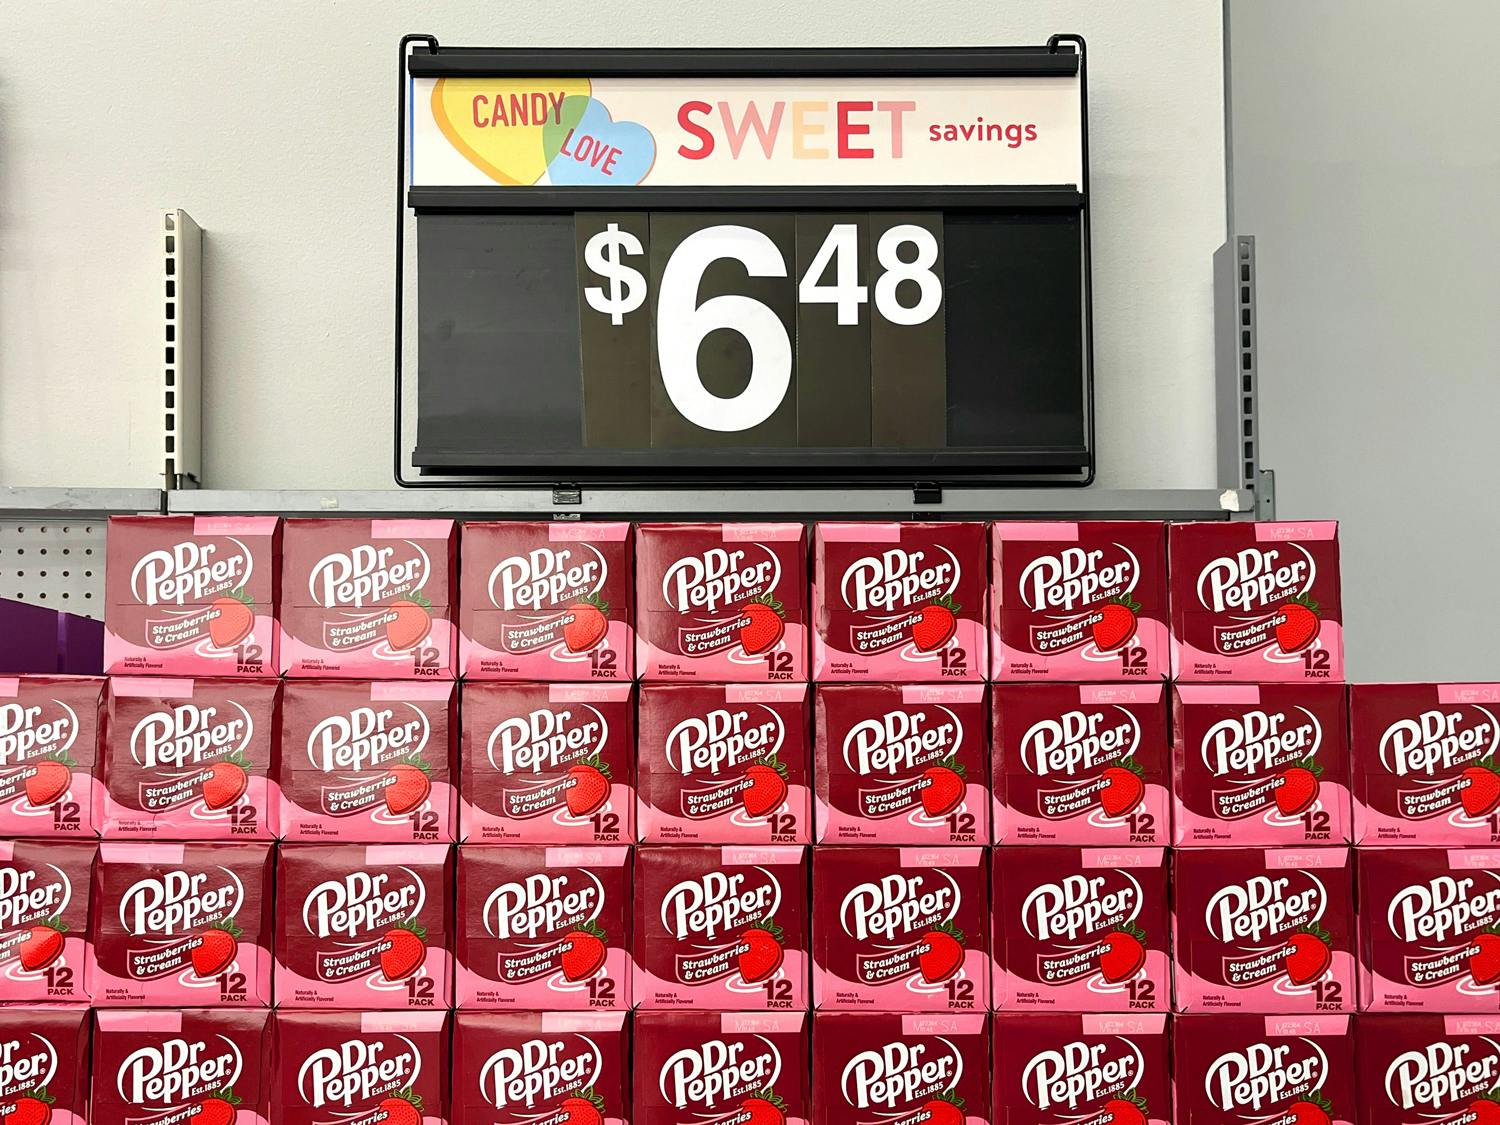 The new Dr Pepper Strawberries and Cream flavored soda on a shelf with a price sign for $6.48